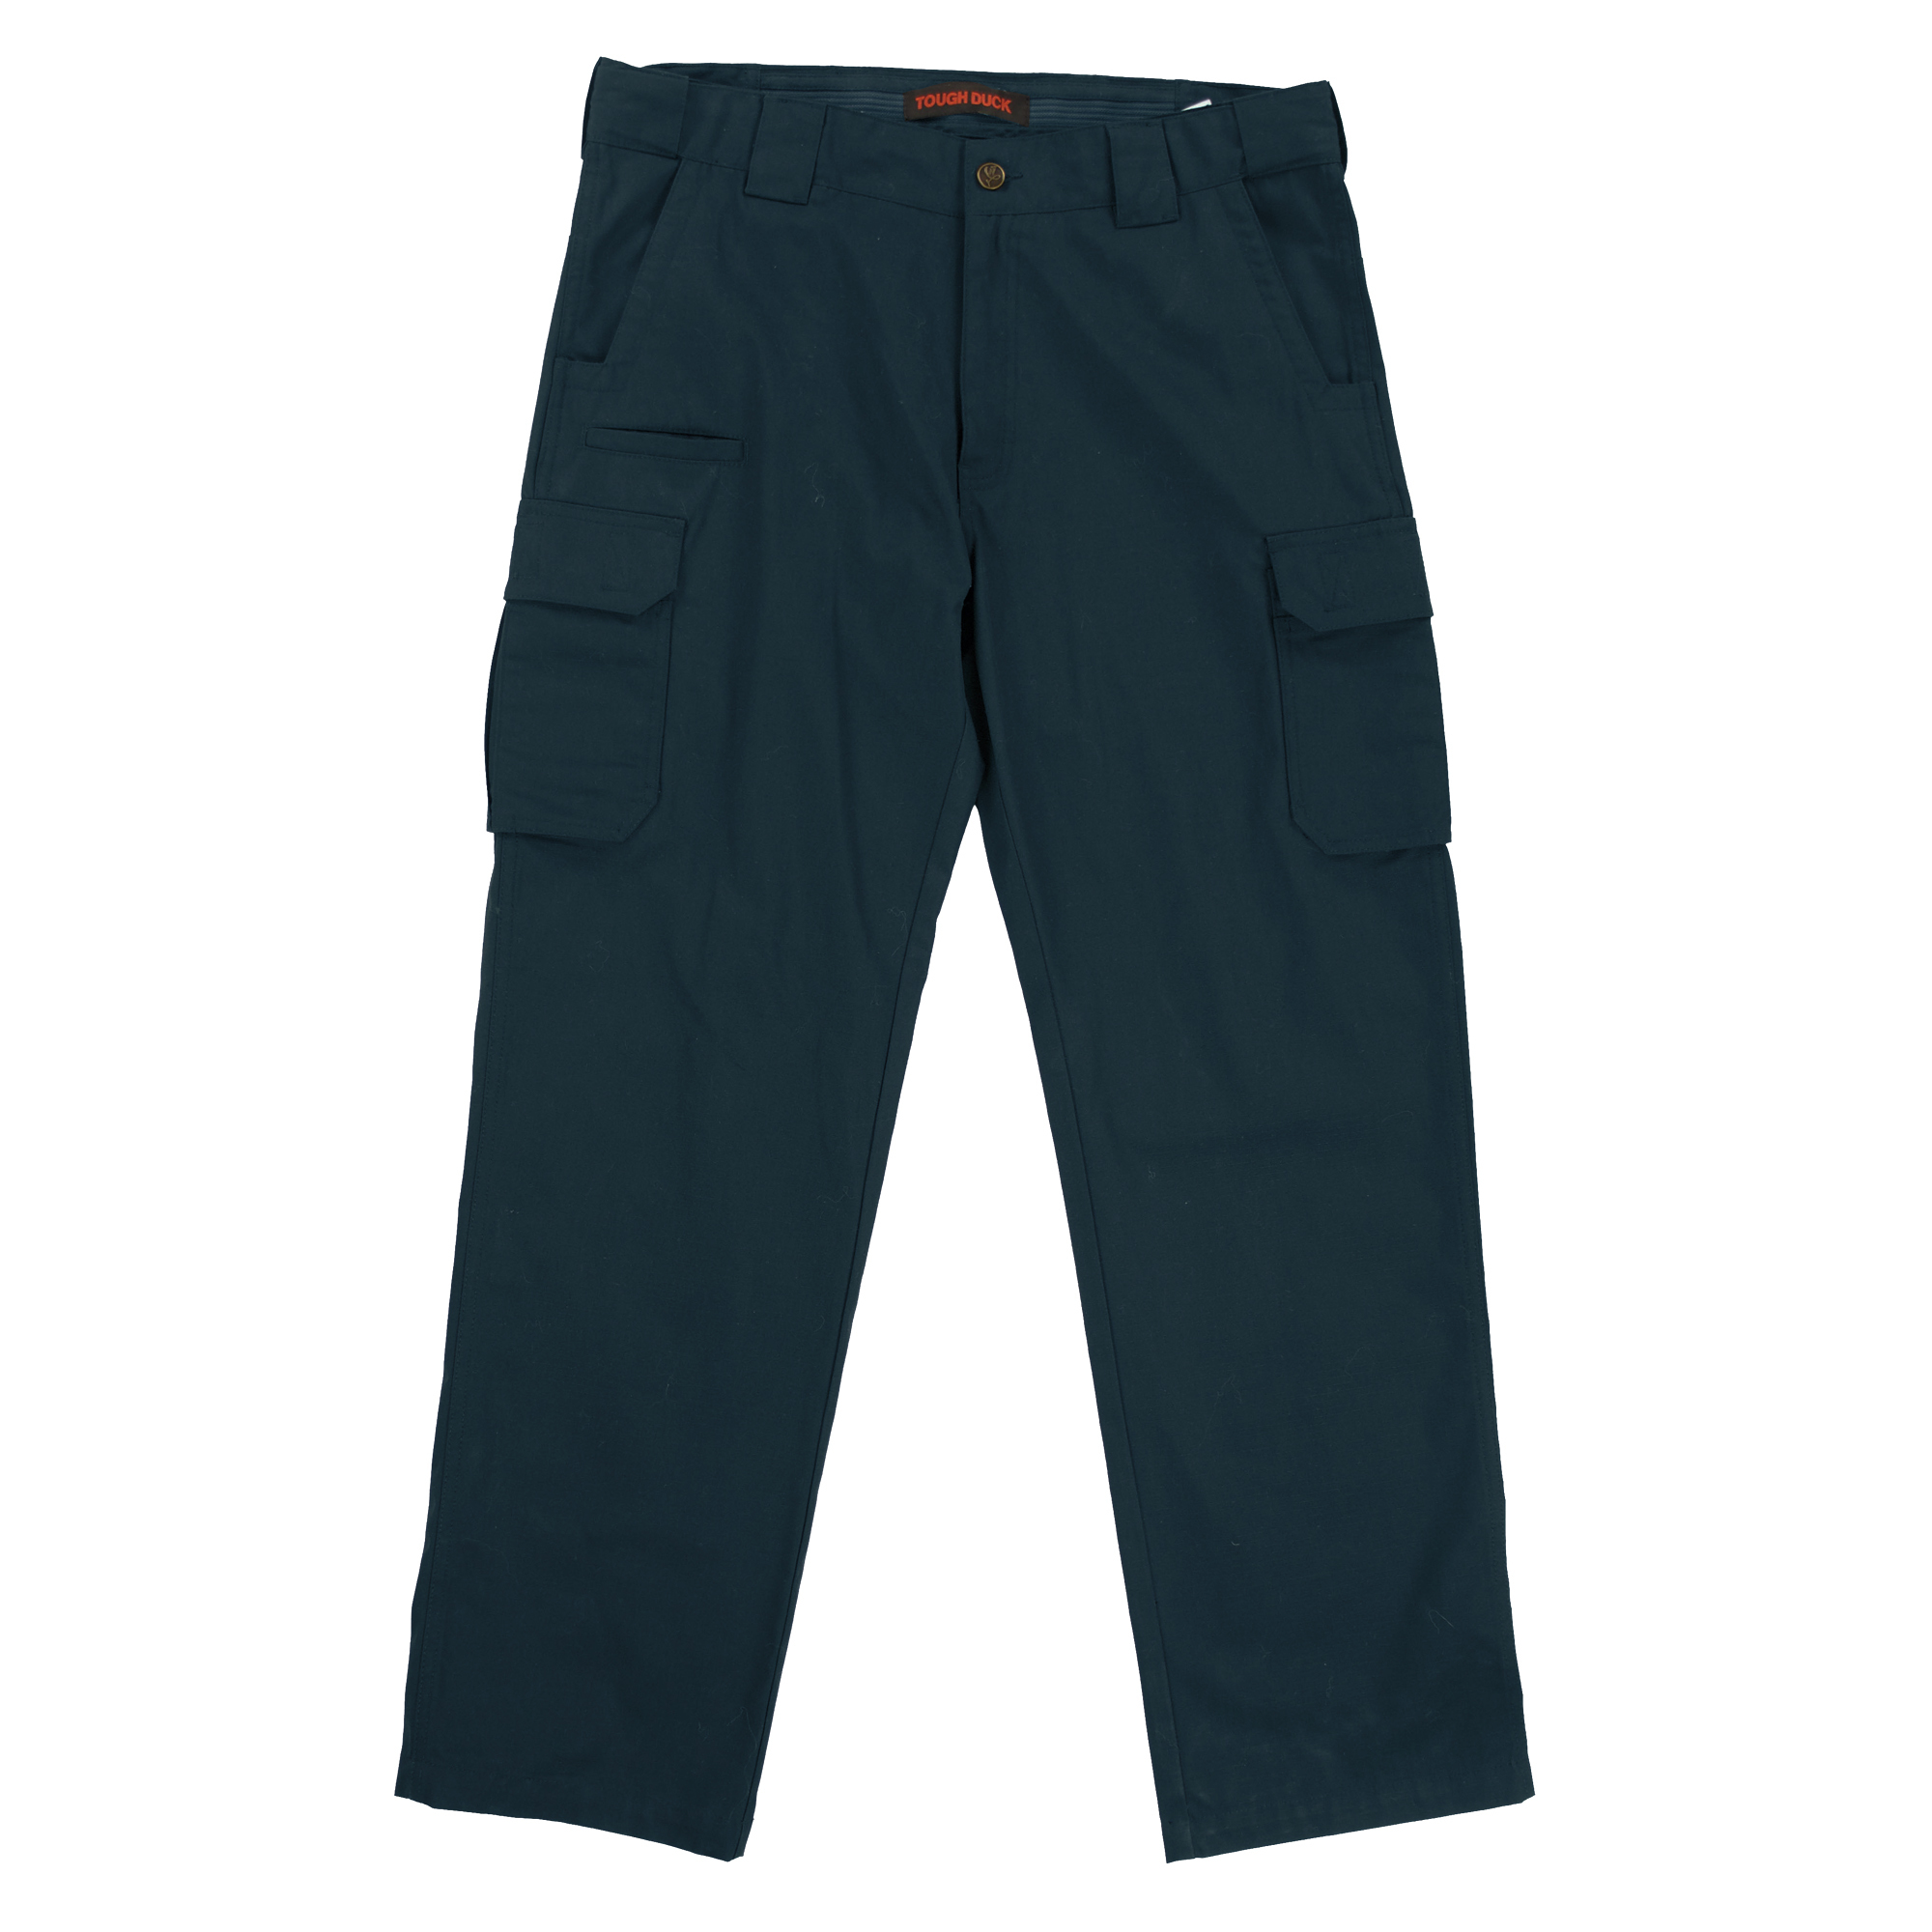 Tough Duck, Ripstop Cargo Pant, Waist 38 in, Inseam 32 in, Color Navy, Model WP111